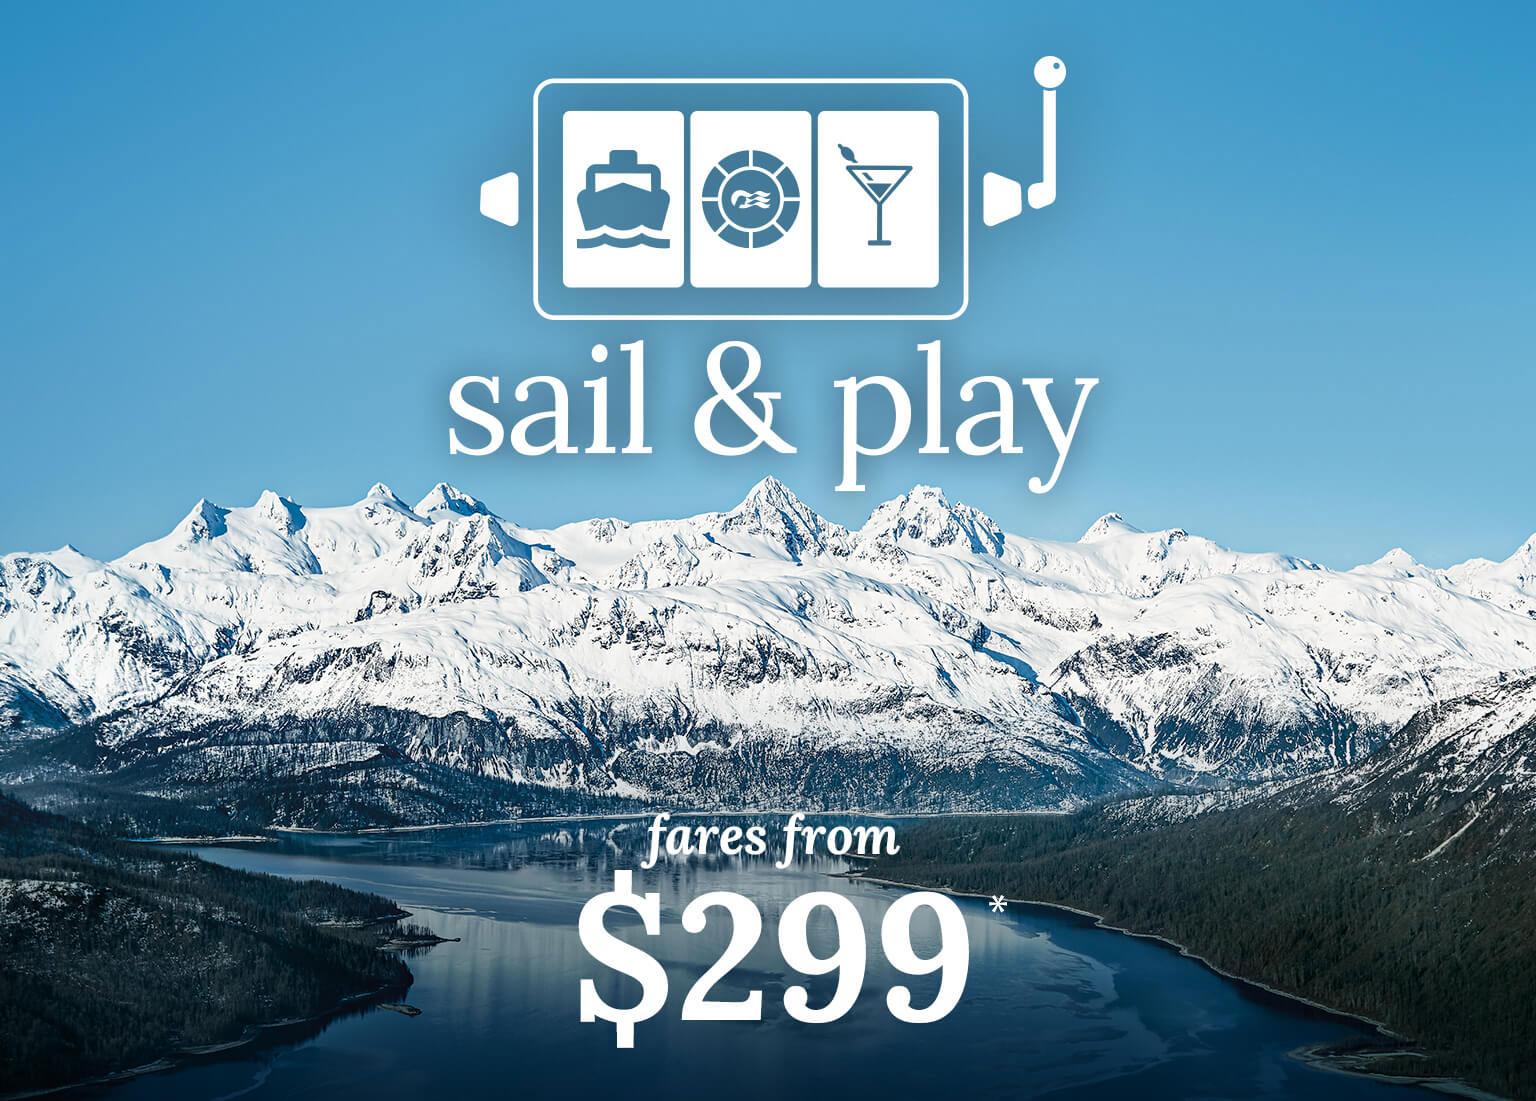 sail & play - fares from $299